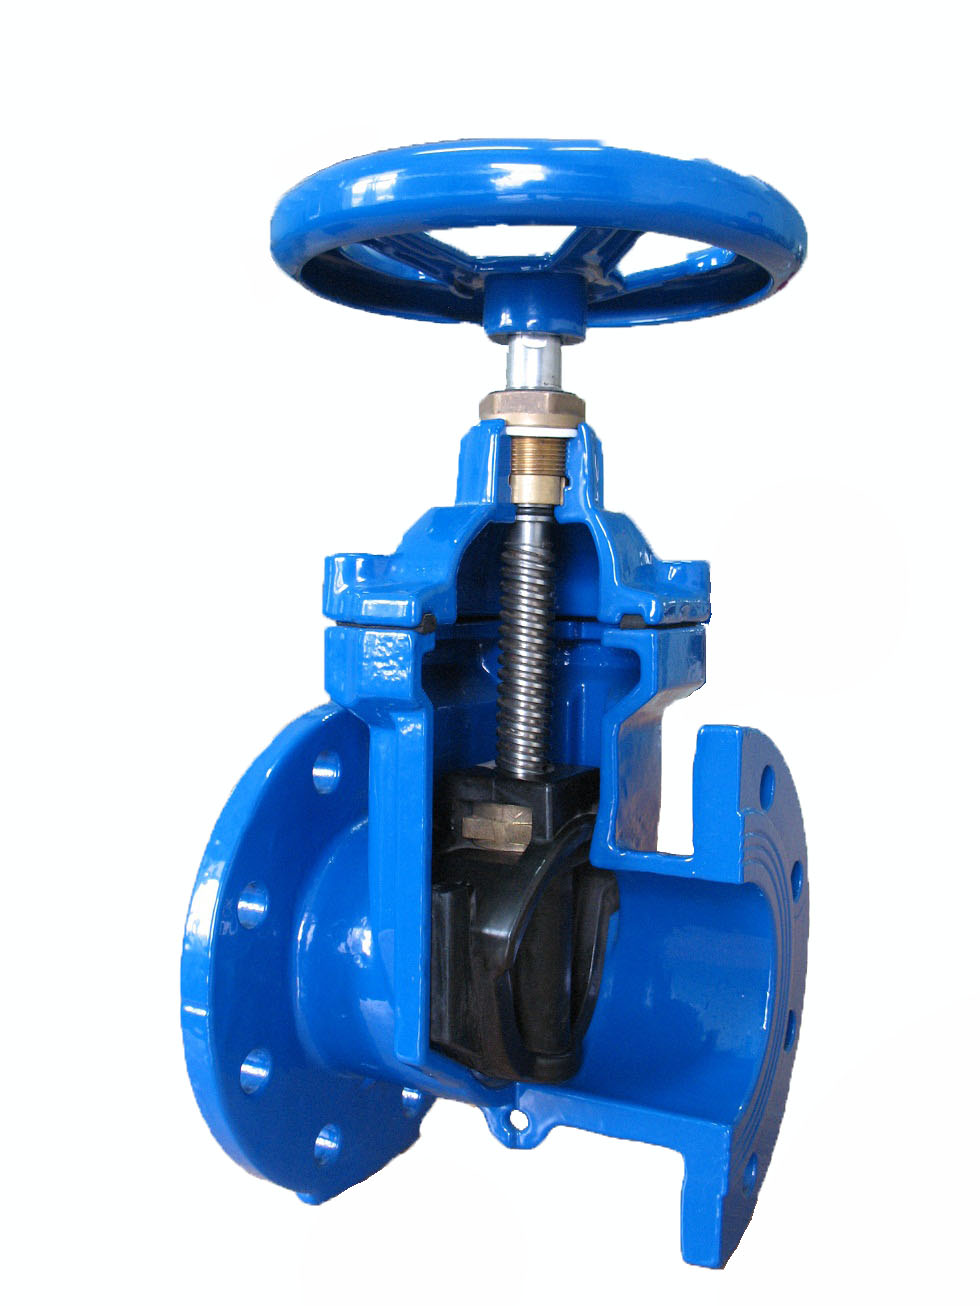 How gate valves work when opened and closed?